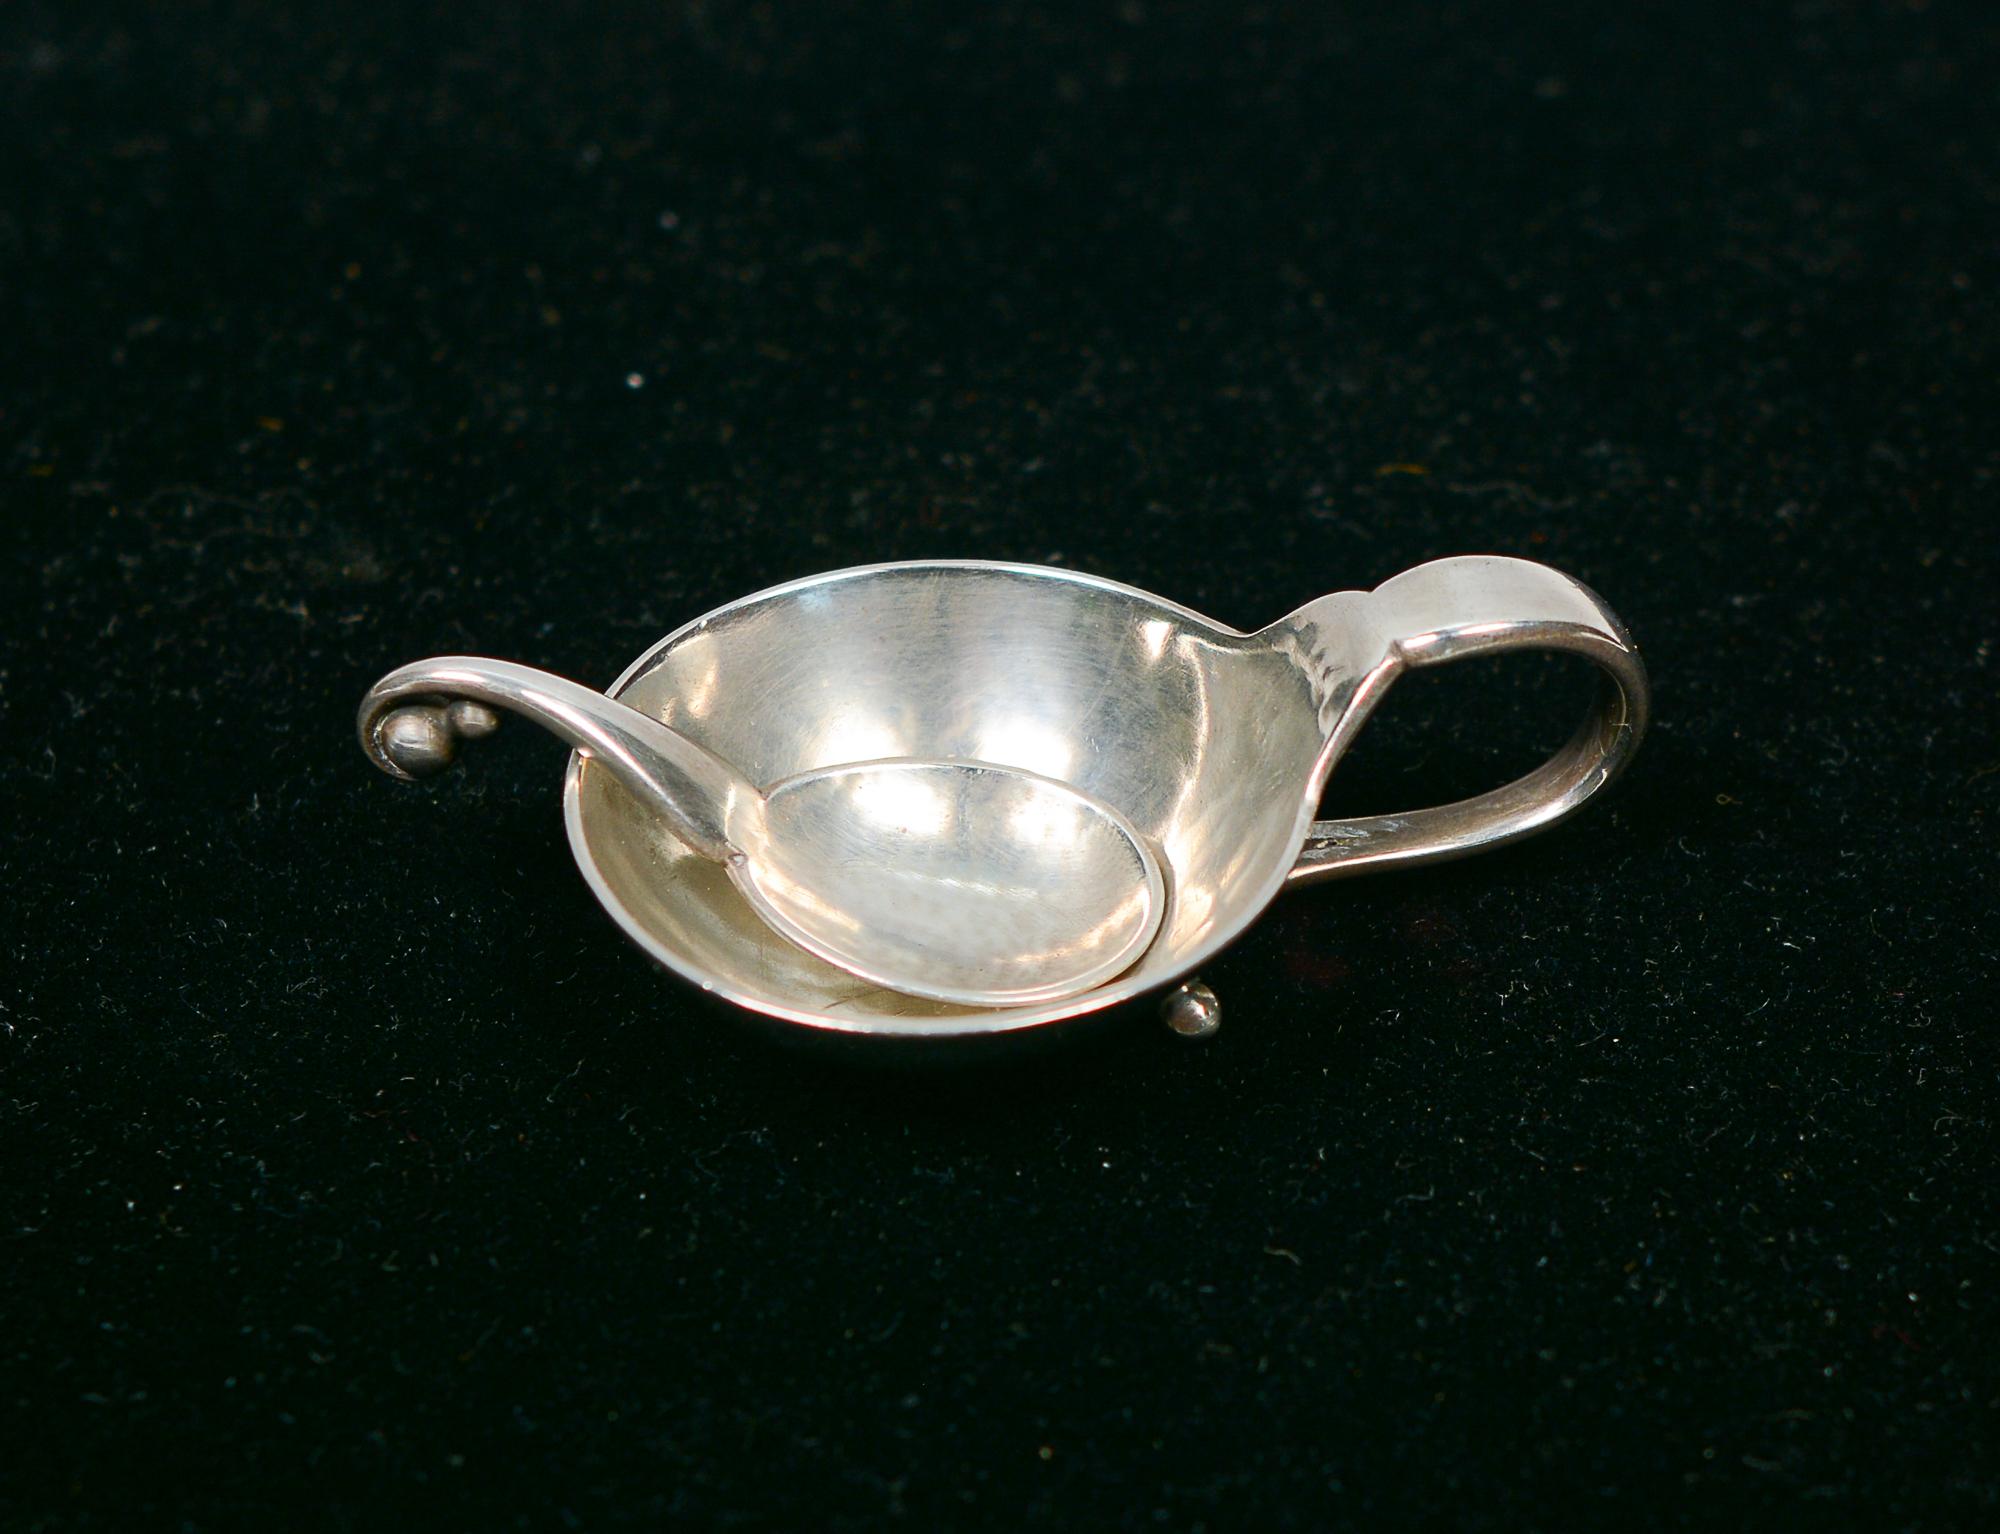 Sterling silver salt cellar and spoon model 110 by Georg Jensen. This is hand hammered. The handle folds around to the bottom and ends with two ball feet. The end of the spoon has a similar ball design. The mark indicates this was retailed in